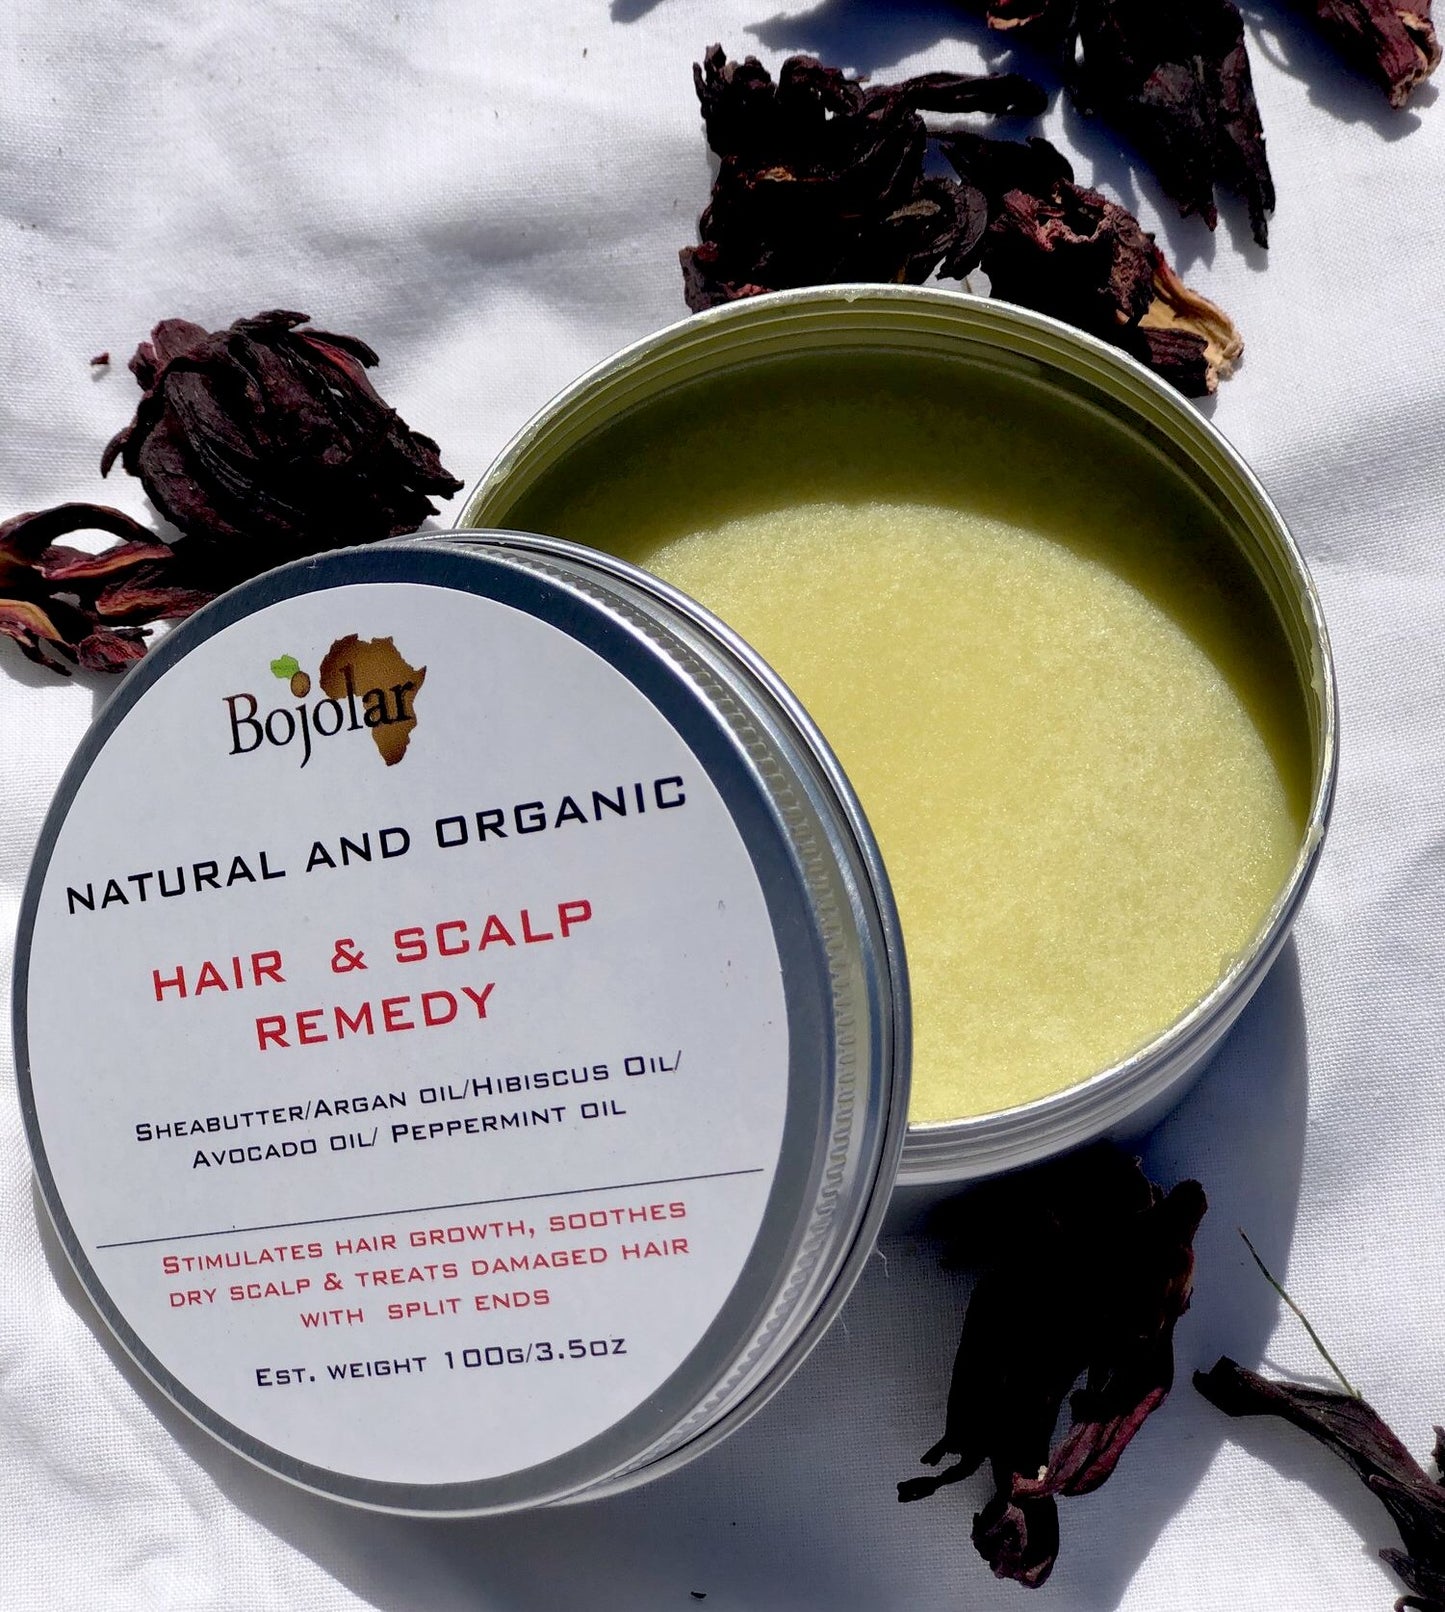 Hibiscus hair and scalp remedy